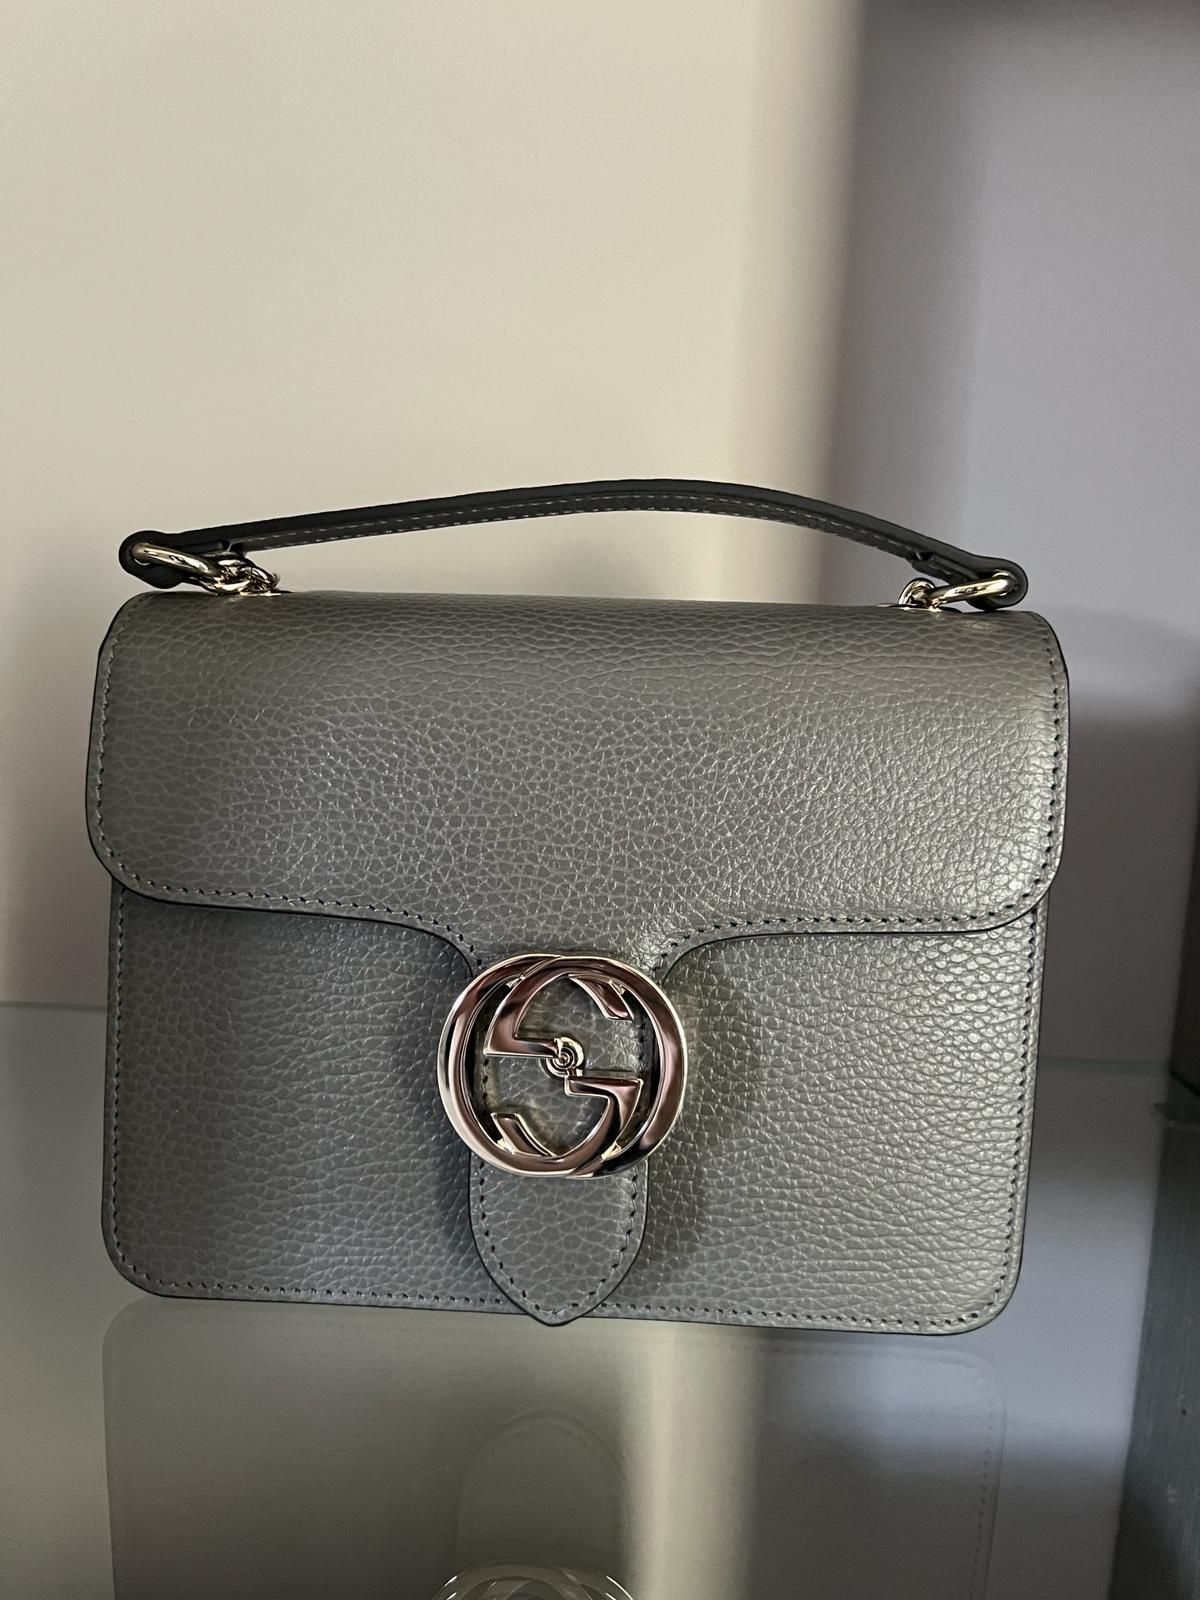 NEW AUTHENTIC GUCCI BAG WITH RECEIPT AND ALL PACKAGING 